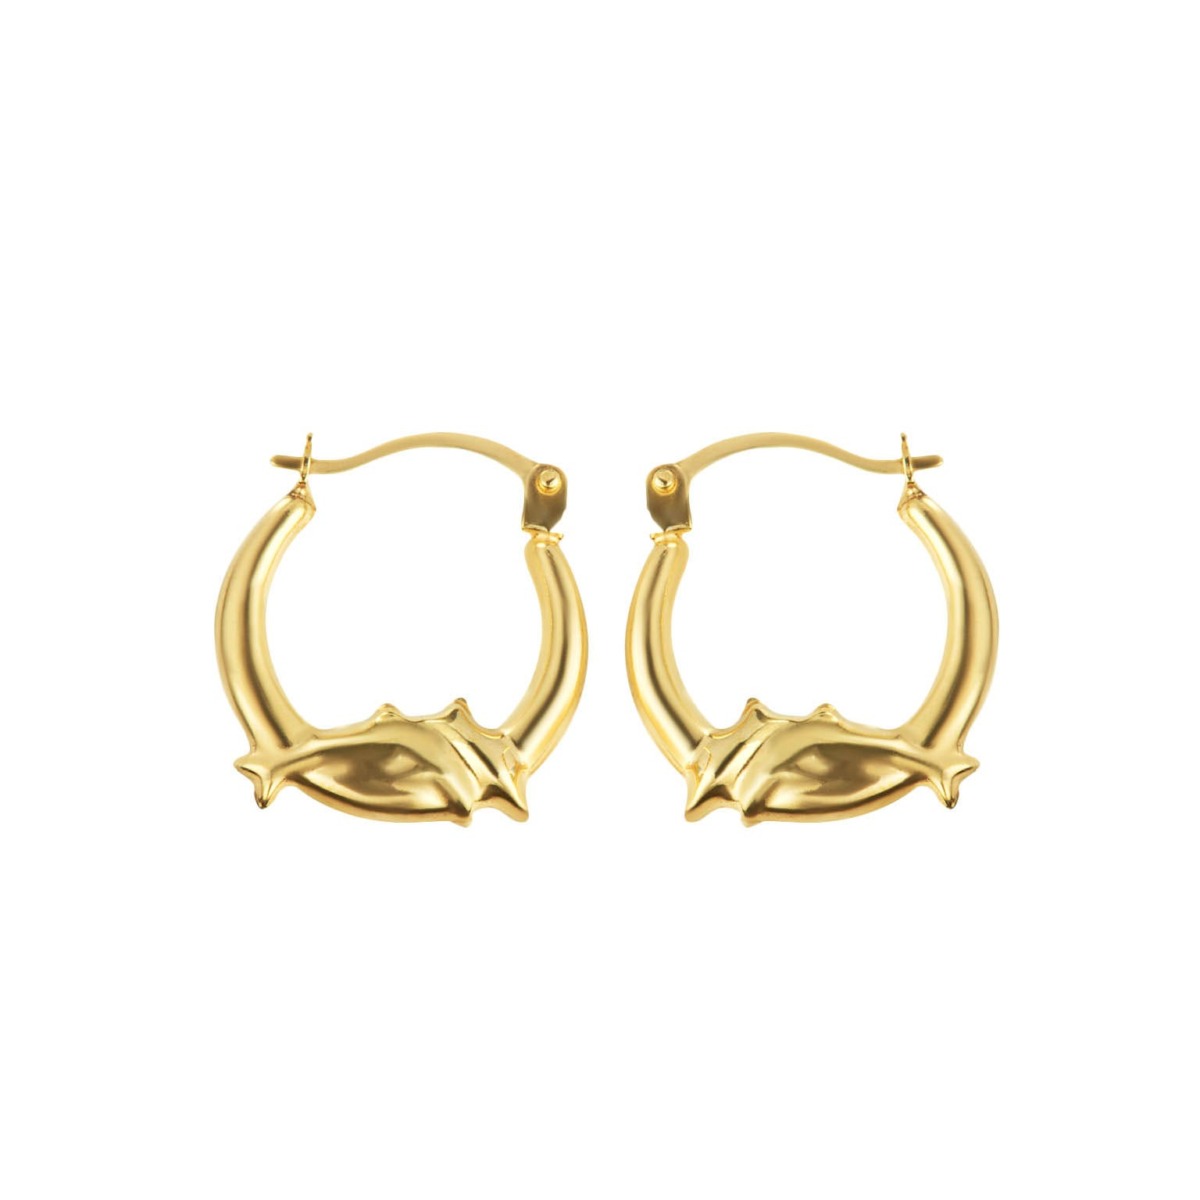 Earrings in Gold by Gold Boutique GOOFASH